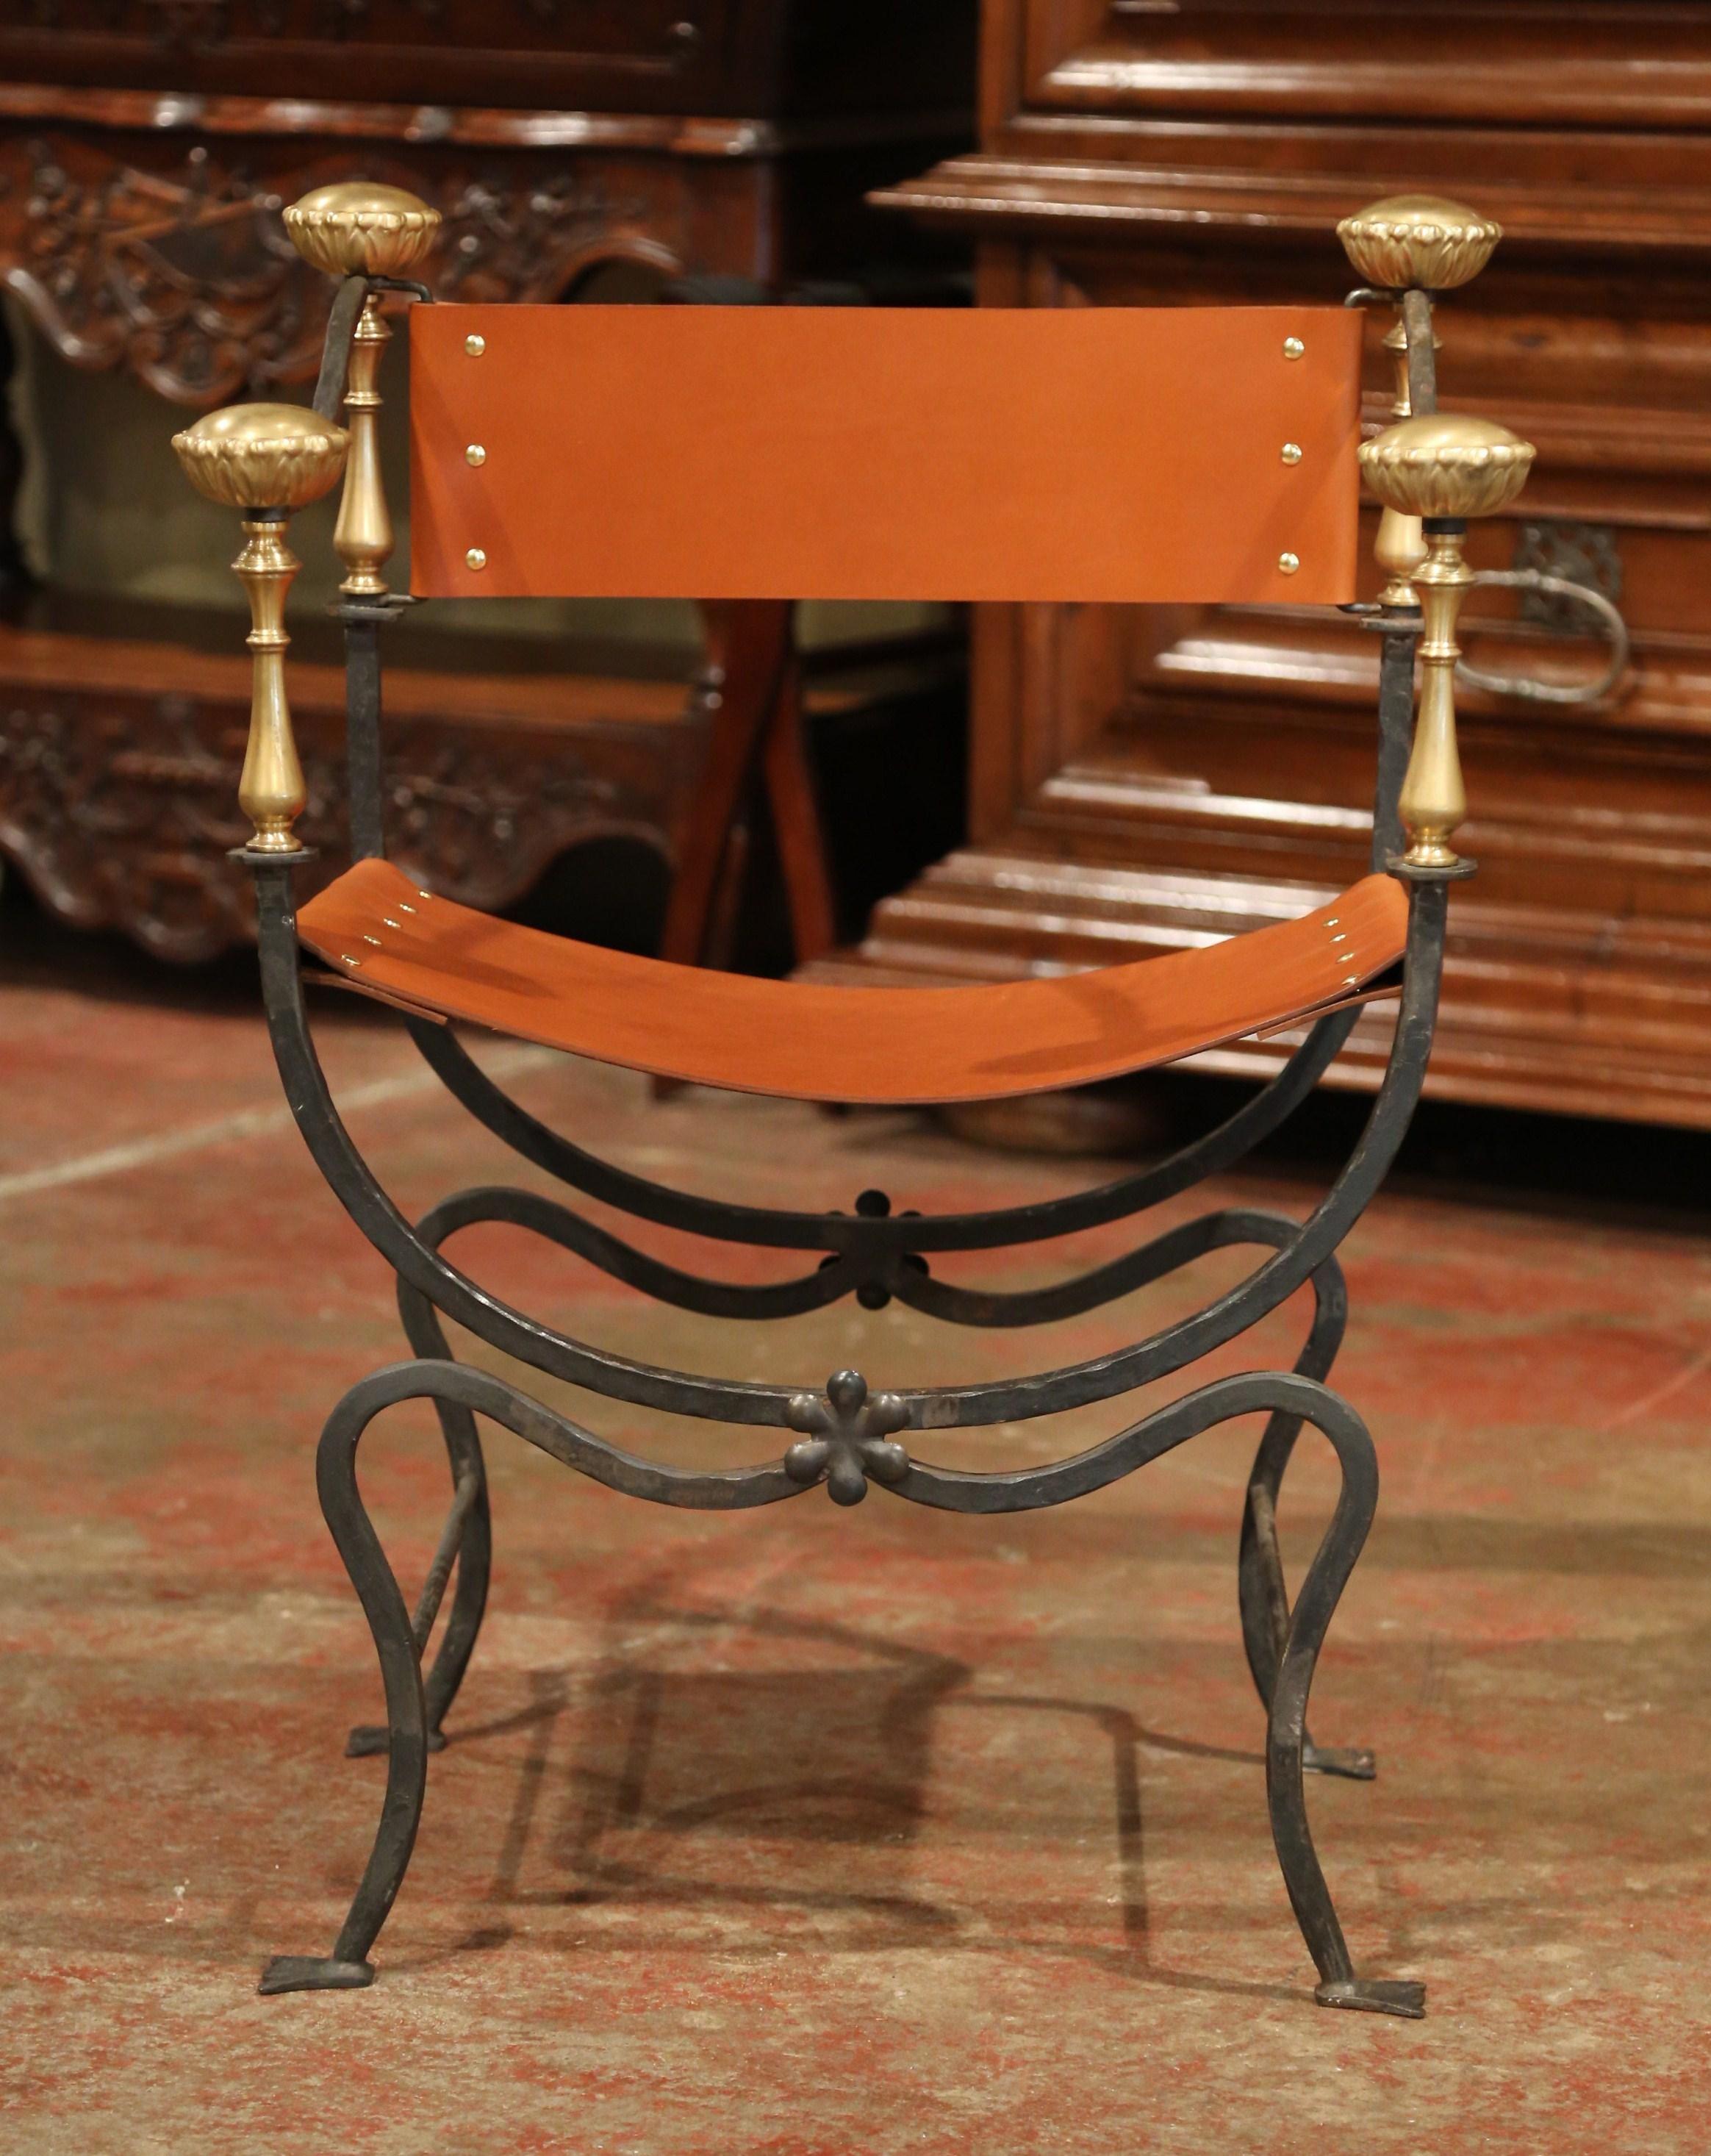 This elegant, antique Campaign armchair was created in Italy, circa 1880. The frame of the chair is formed from forged iron; the piece has scrolled legs, and is embellished with decorative bronze rosette finials on each armrest and the back. Both